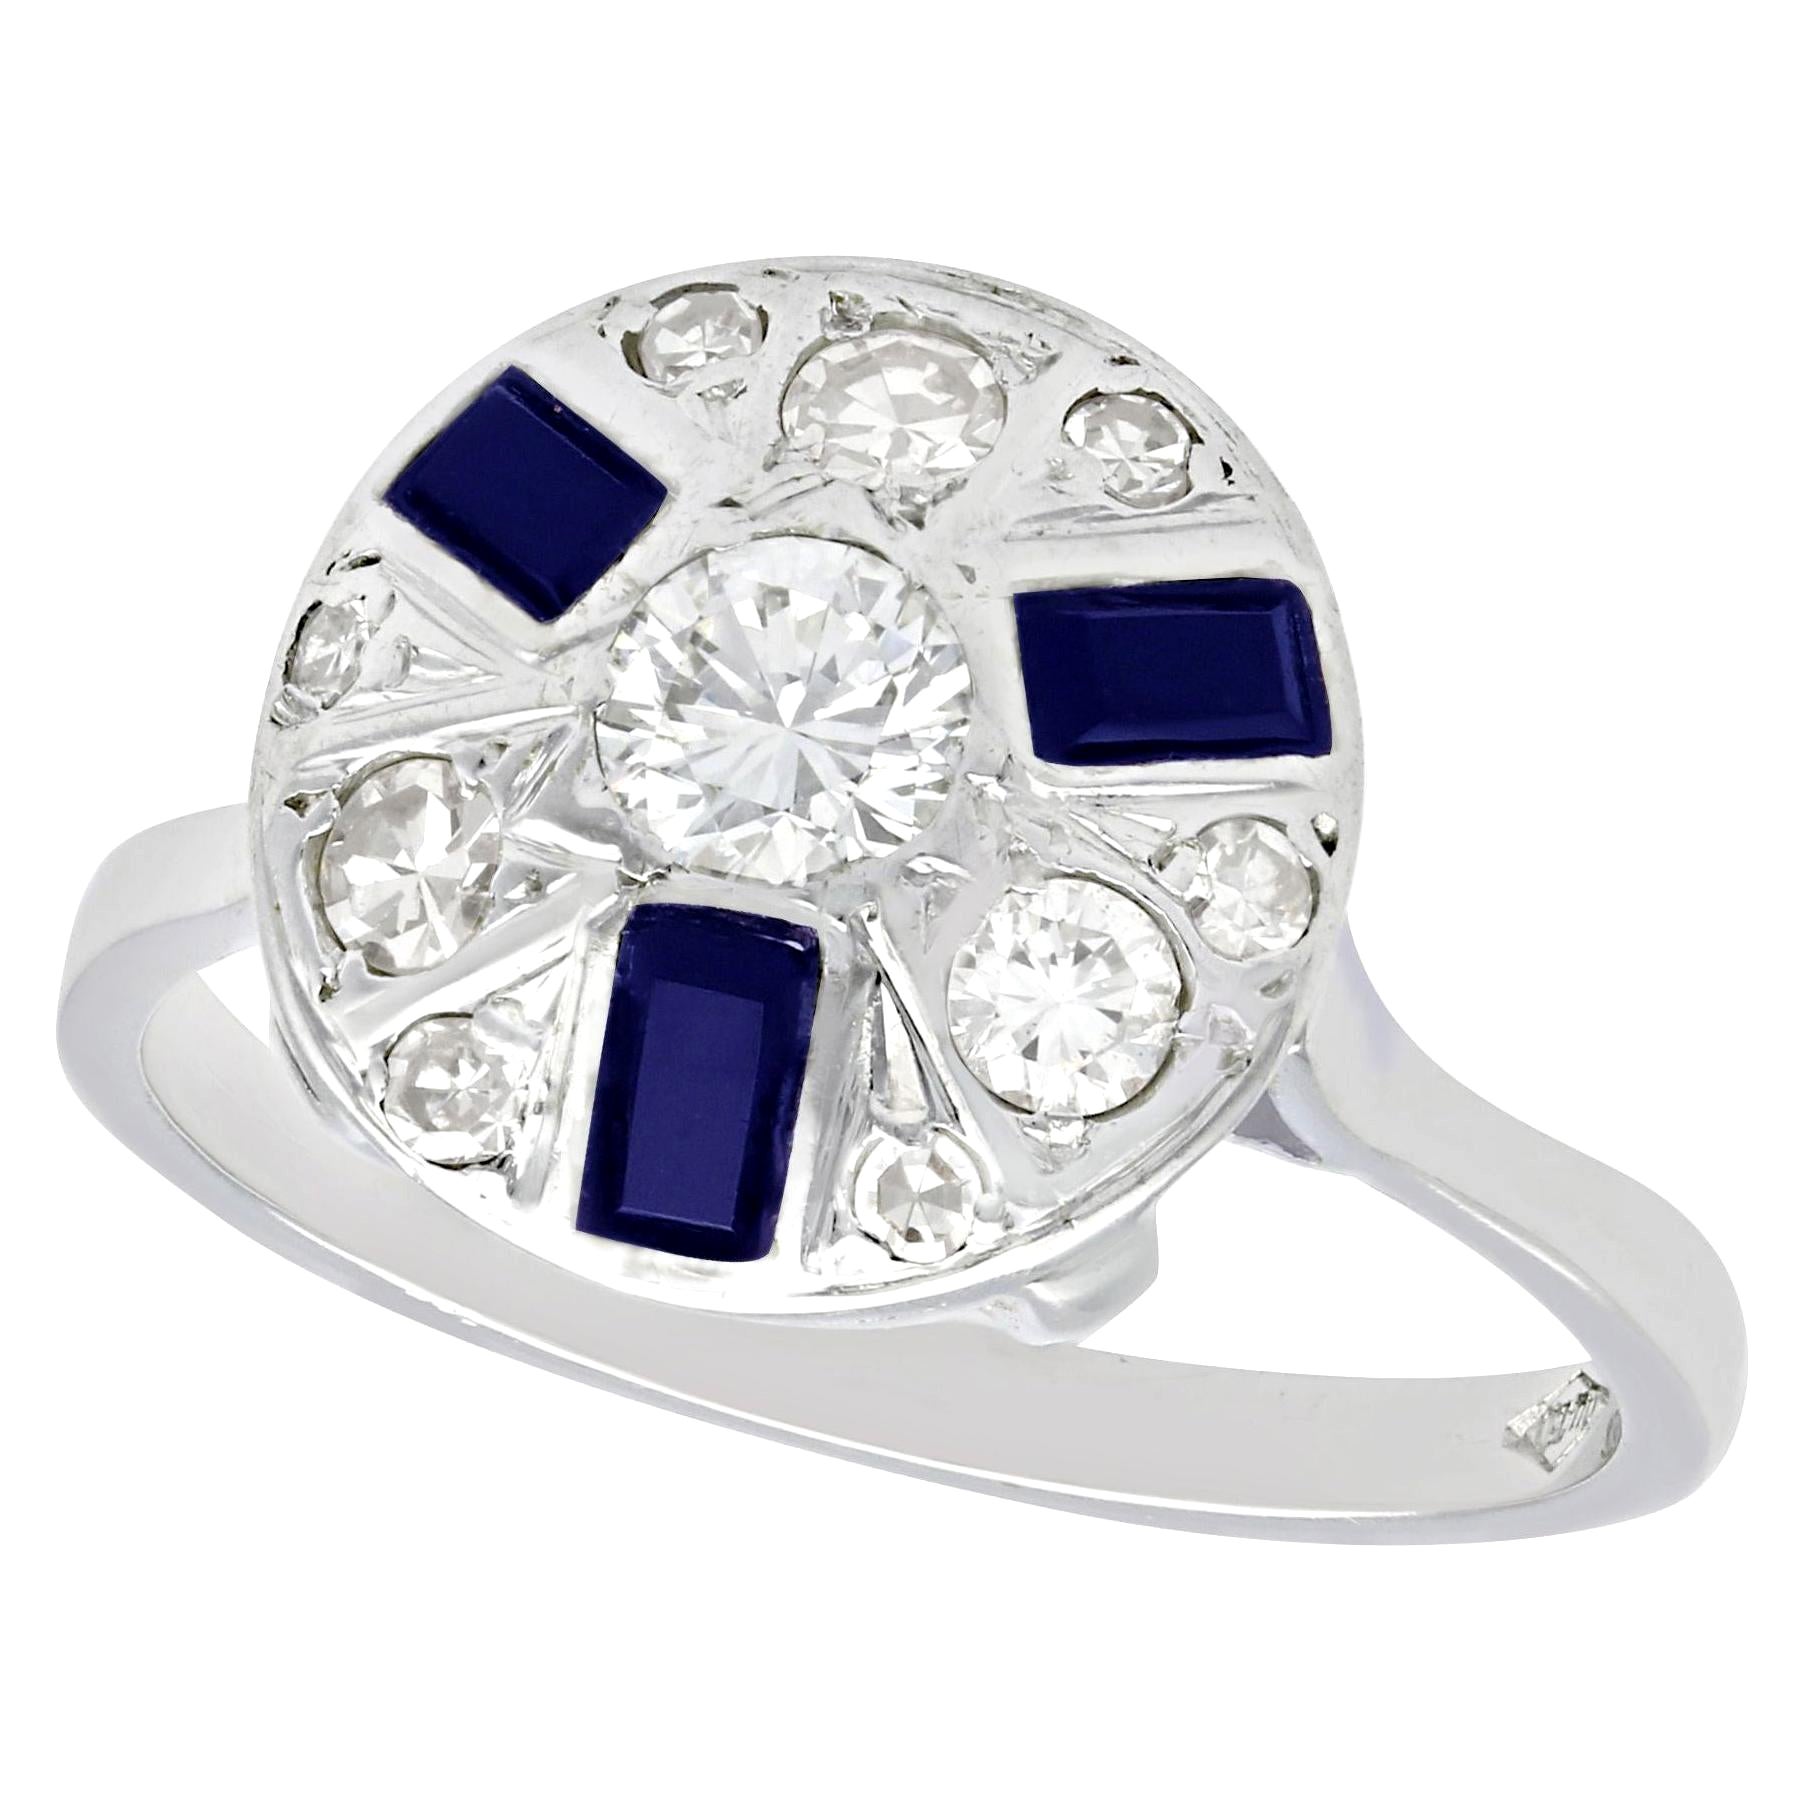 1940s Vintage Diamond and Sapphire White Gold Cocktail Ring